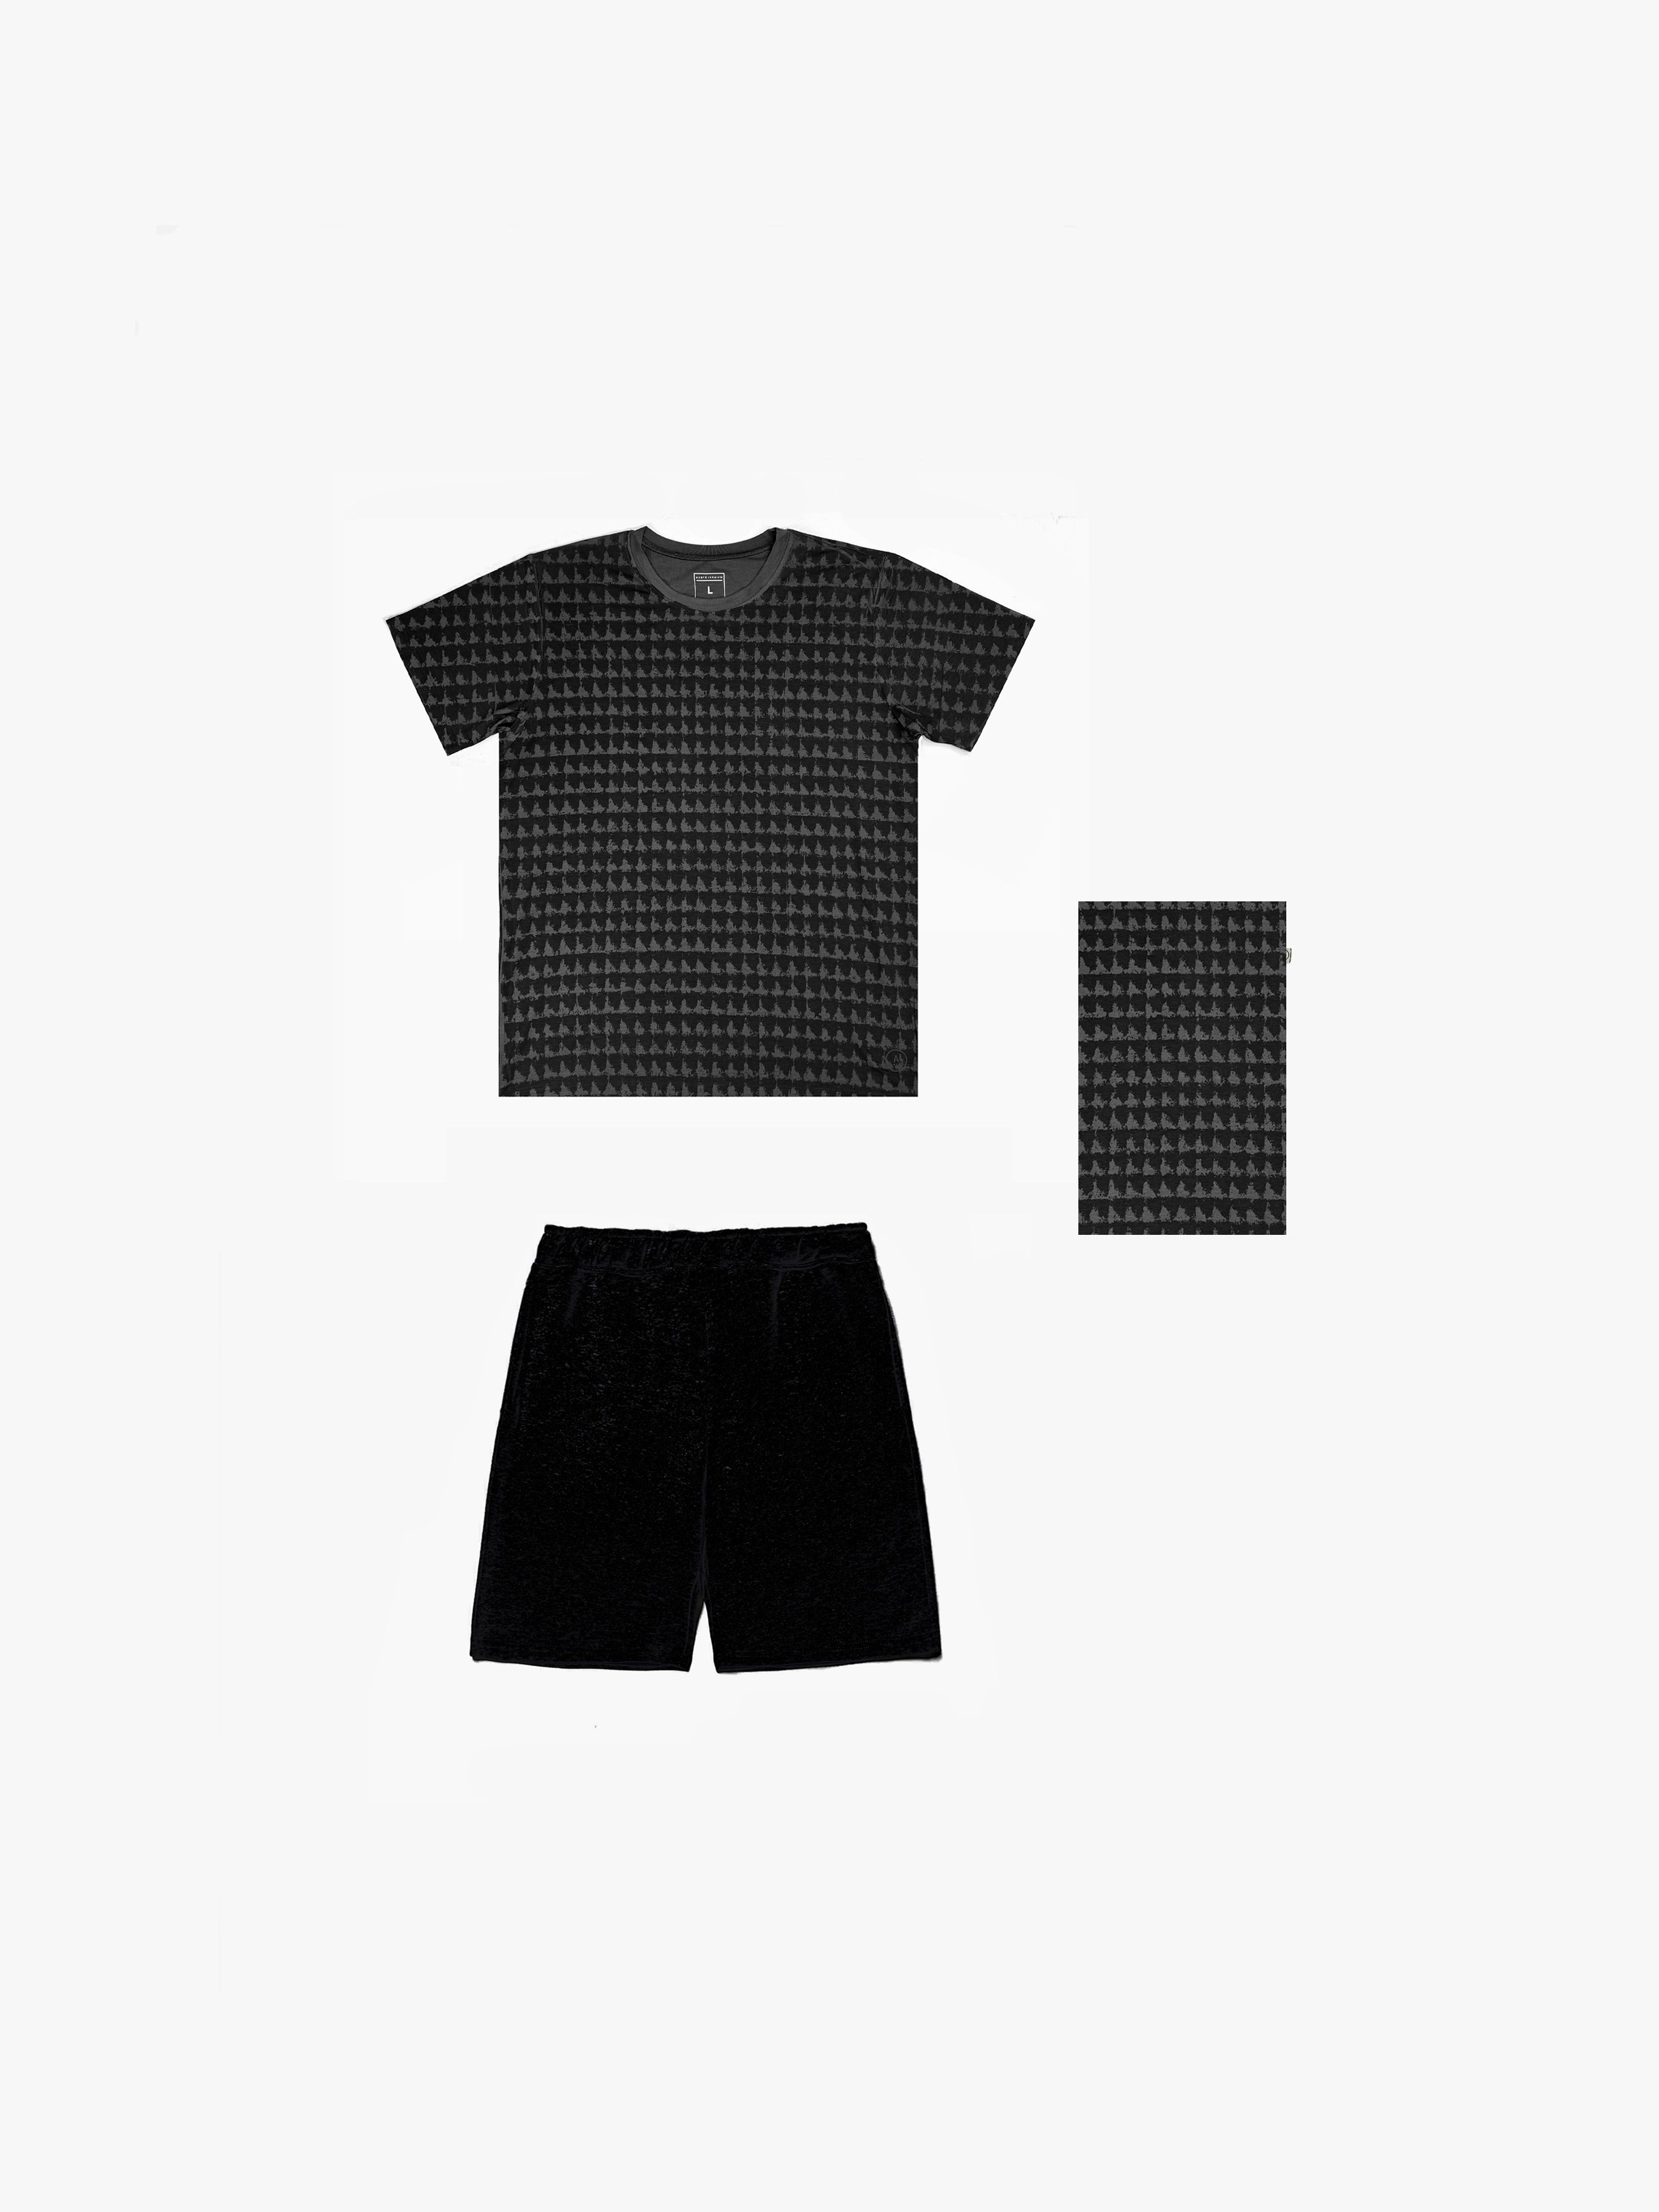 DISTRESSED HOUNDSTOOTH KIT THREE PACK